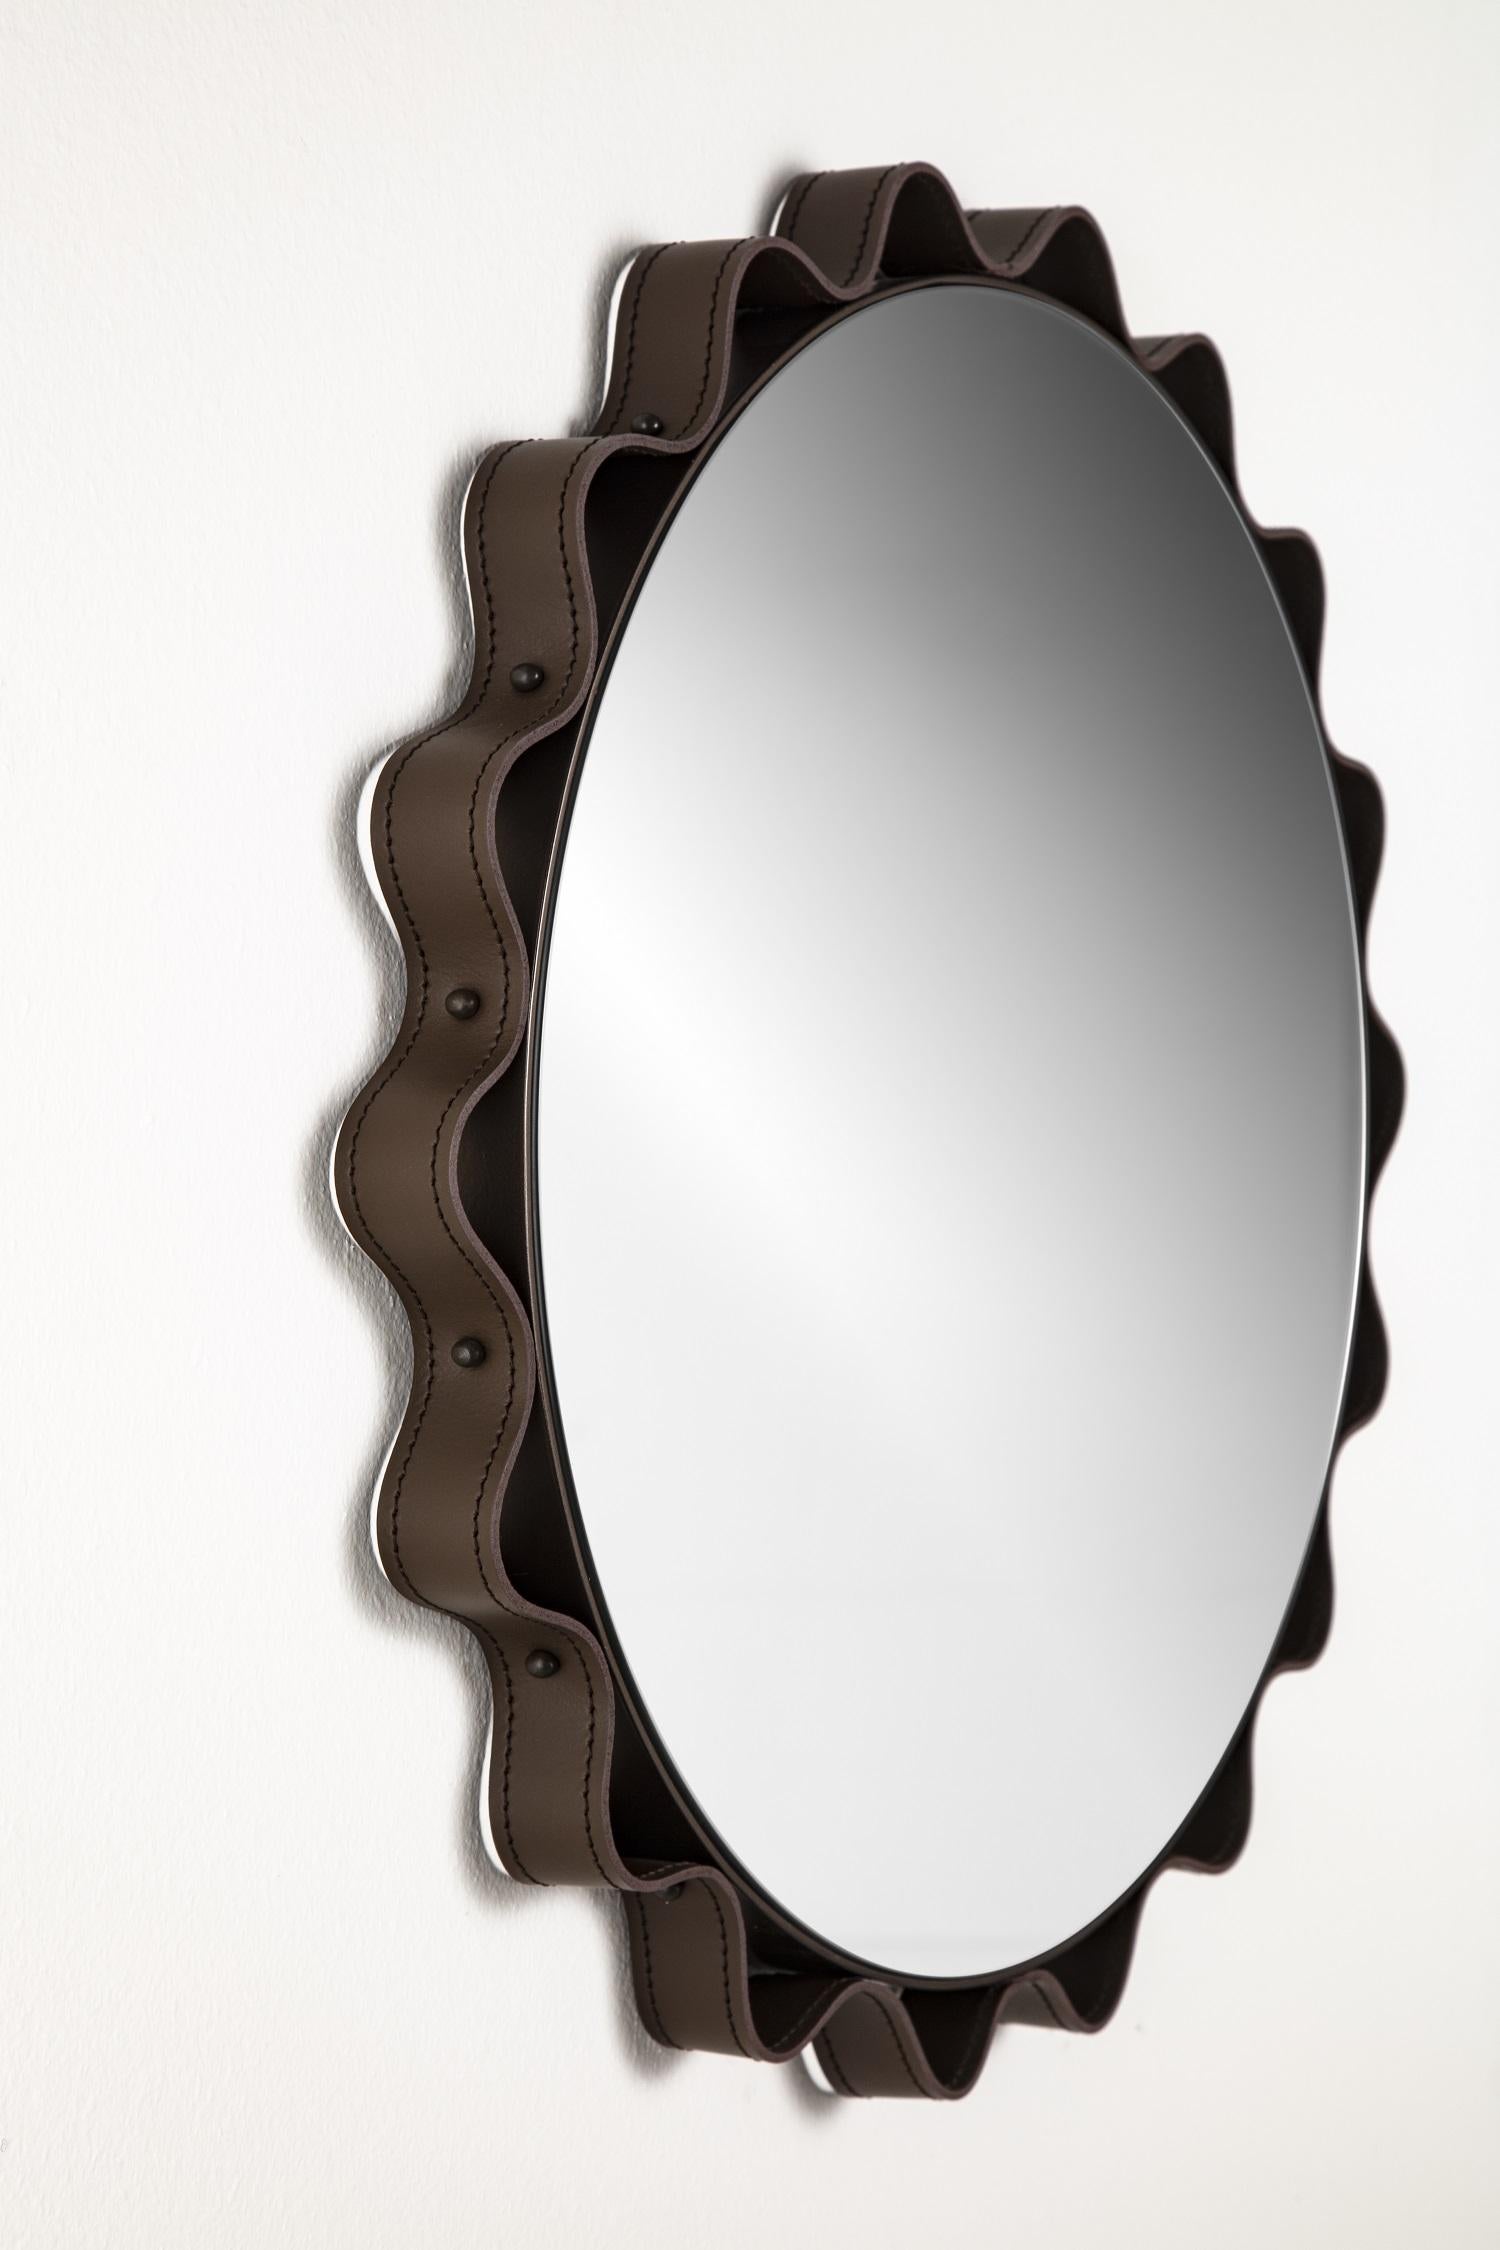 Modern Italian Made Leather Mirror For Sale 4